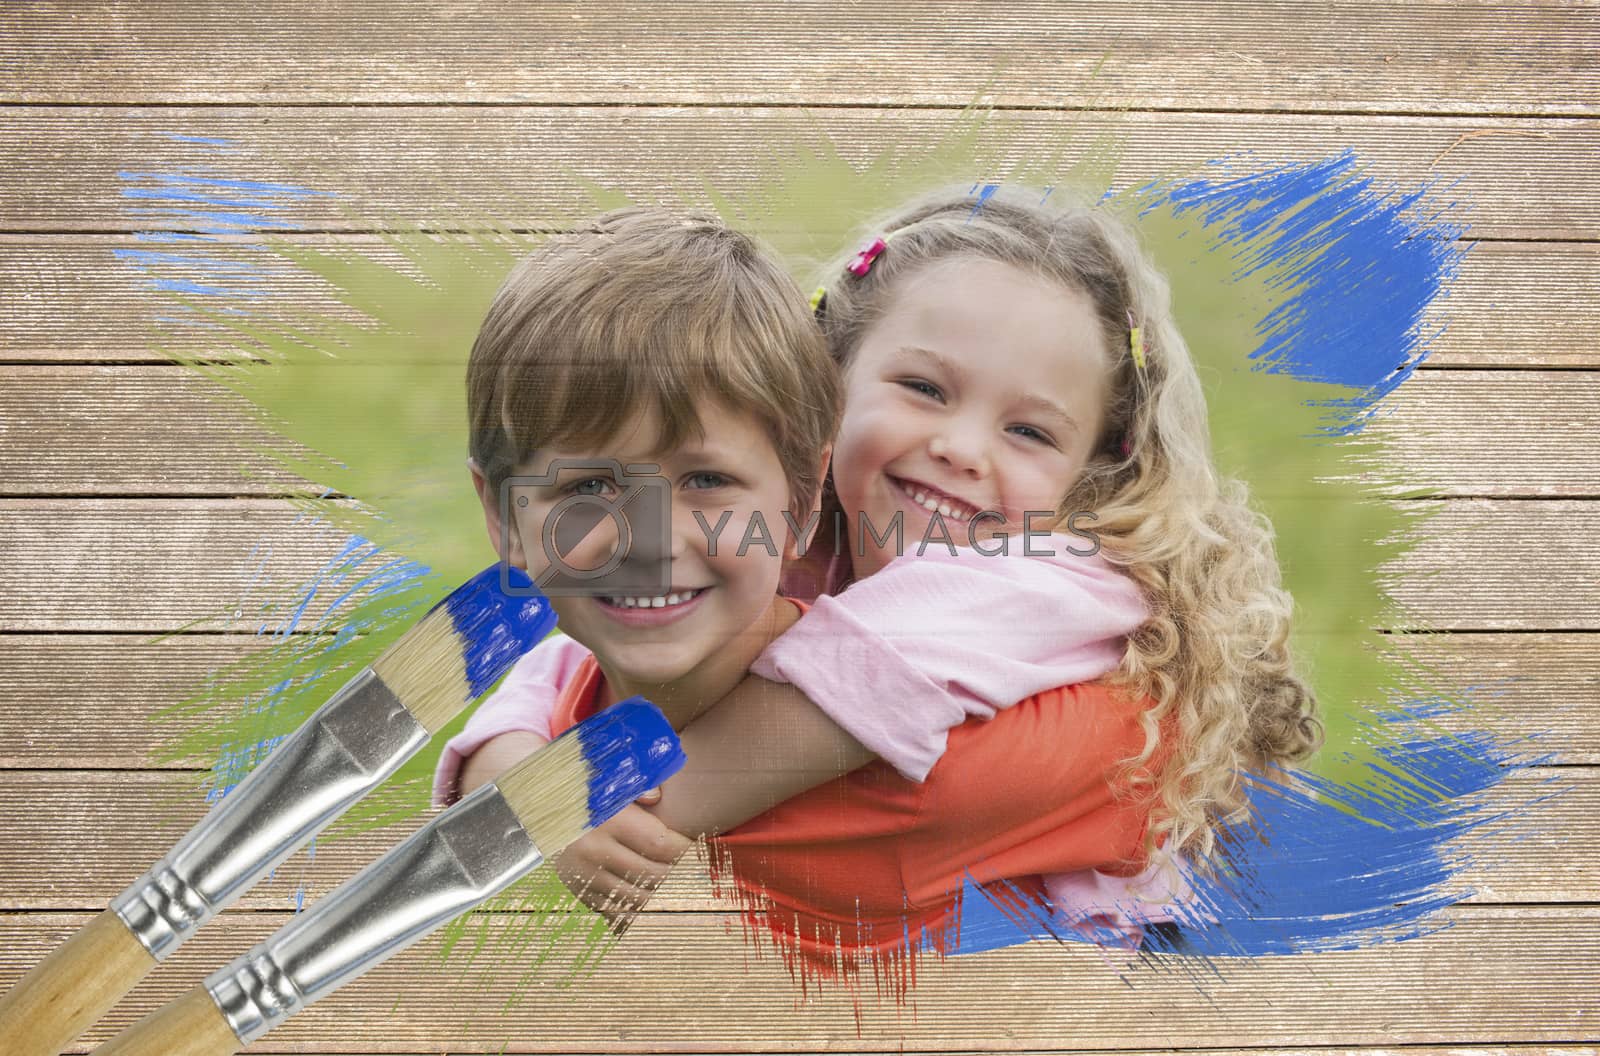 Royalty free image of Composite image of sibling smiling in the park by Wavebreakmedia